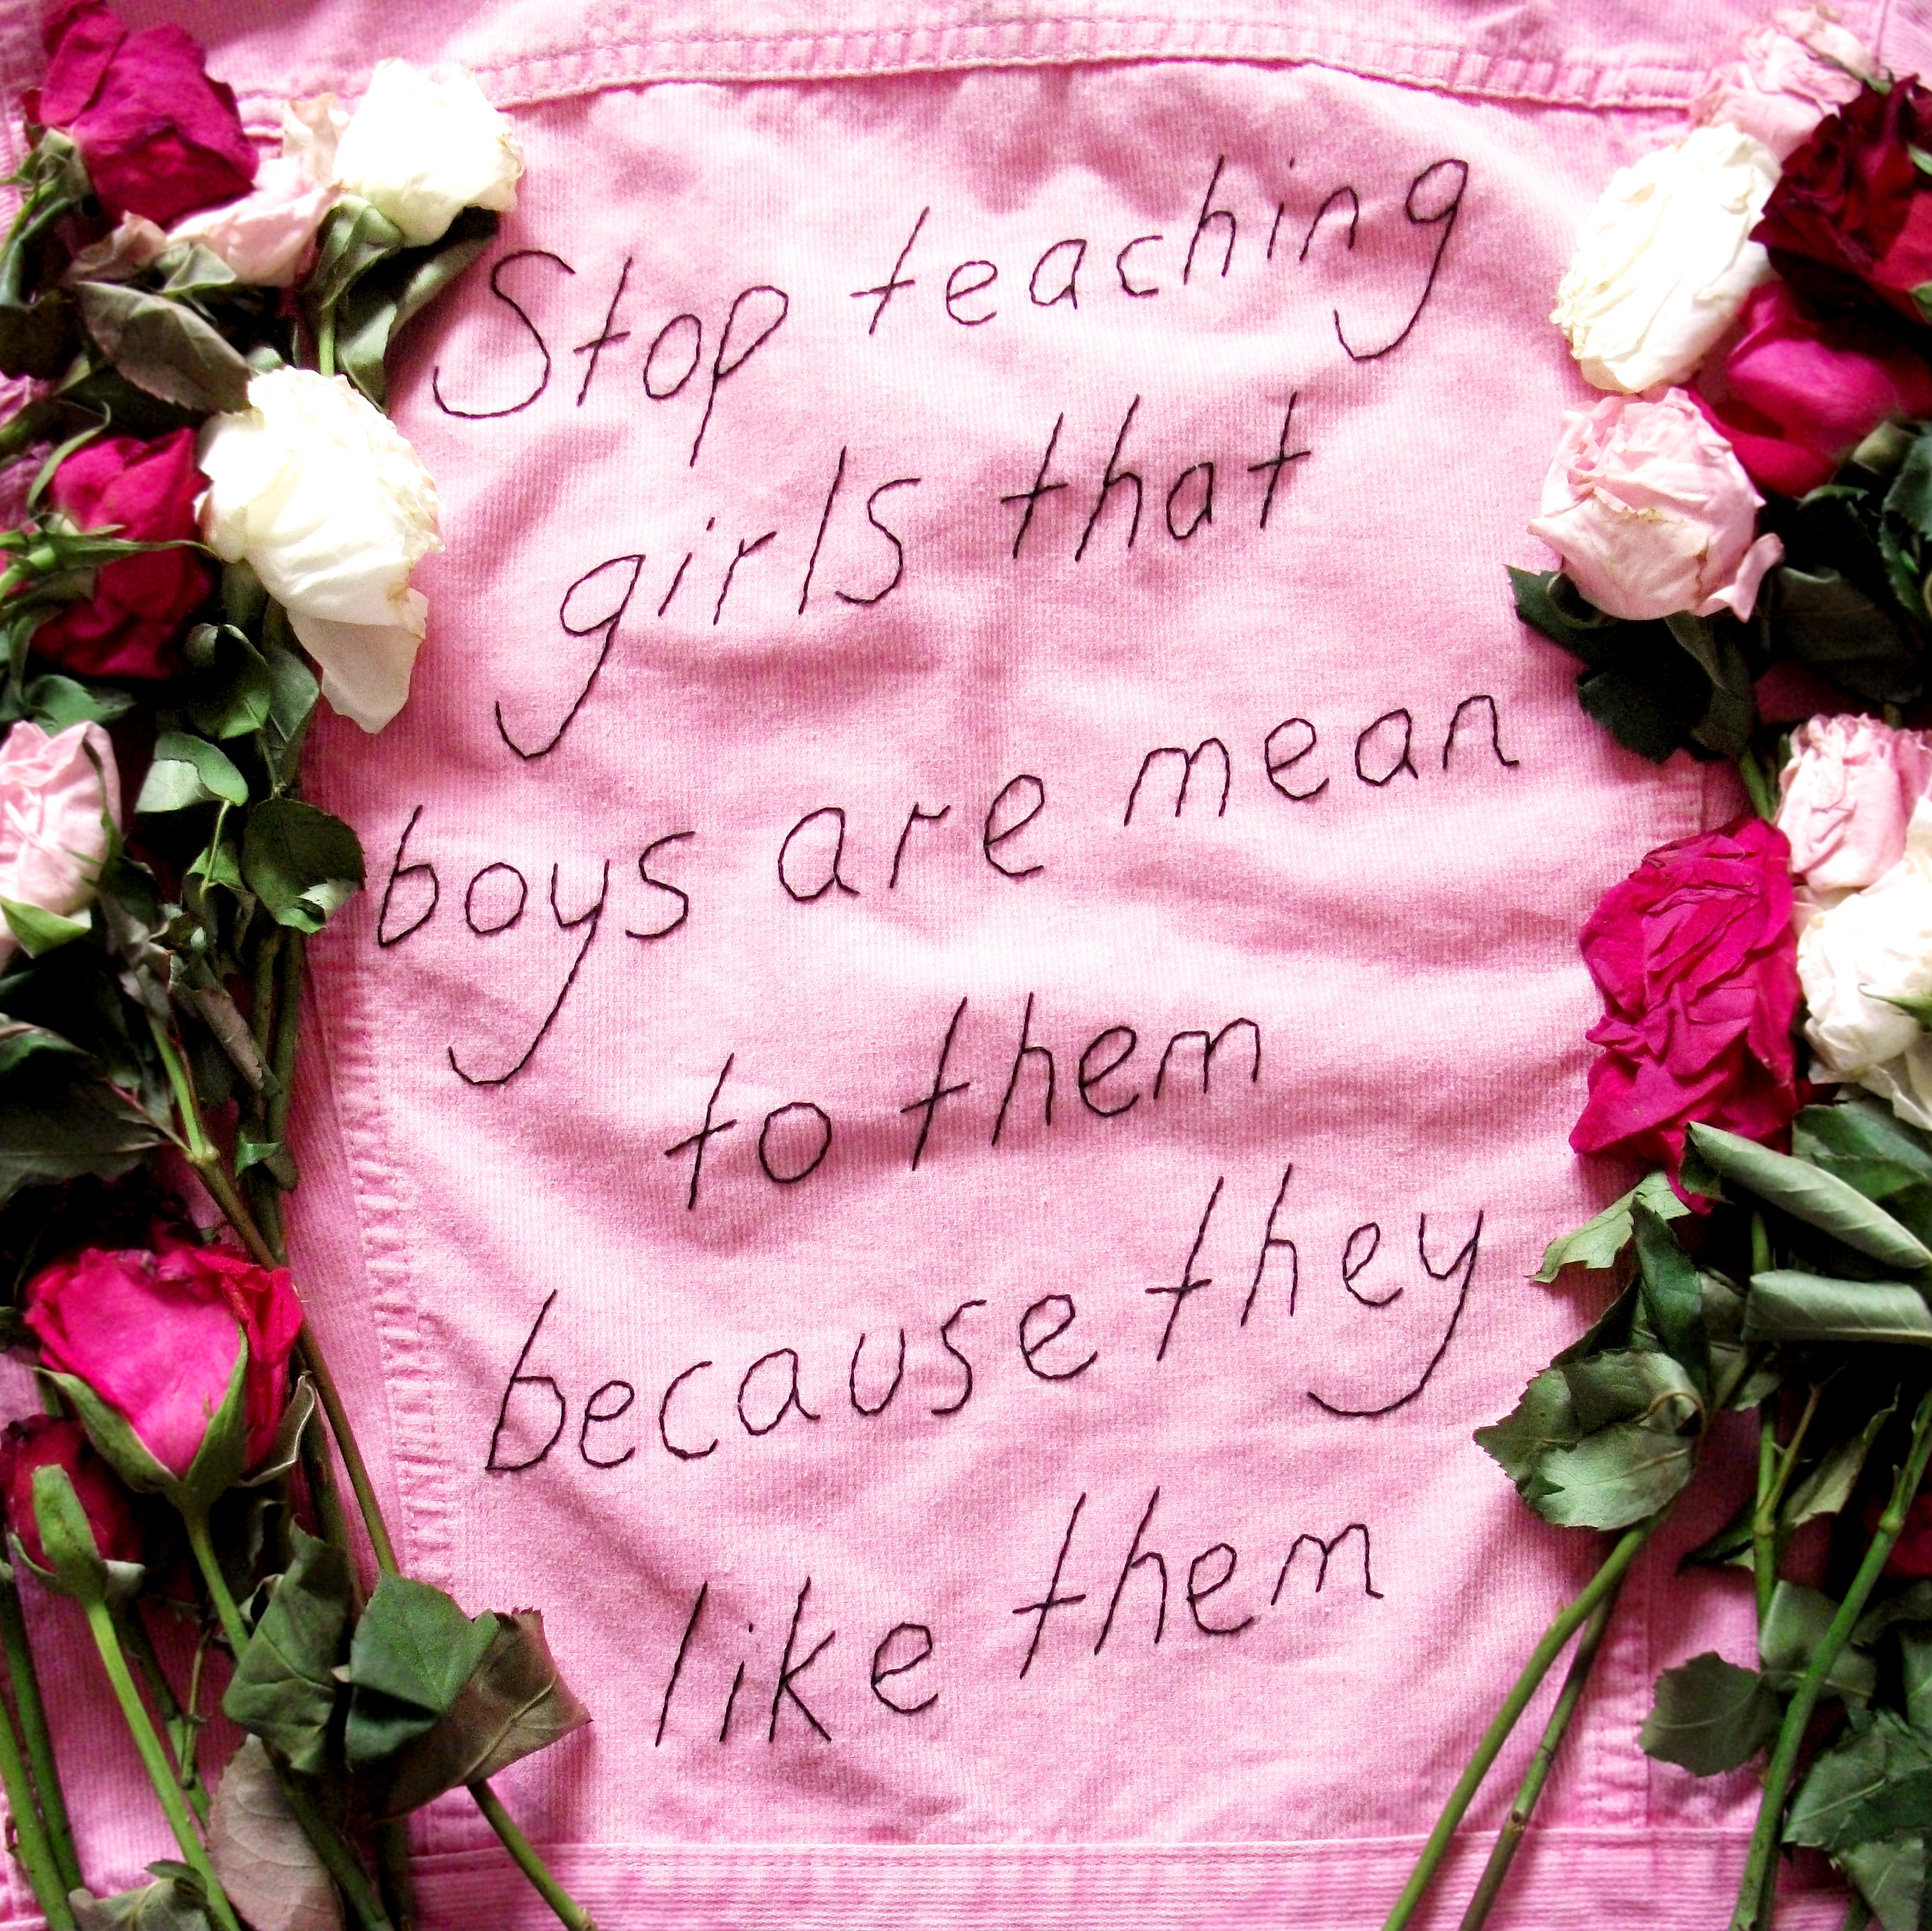 Stop teaching girls that boys are mean to them because they like them